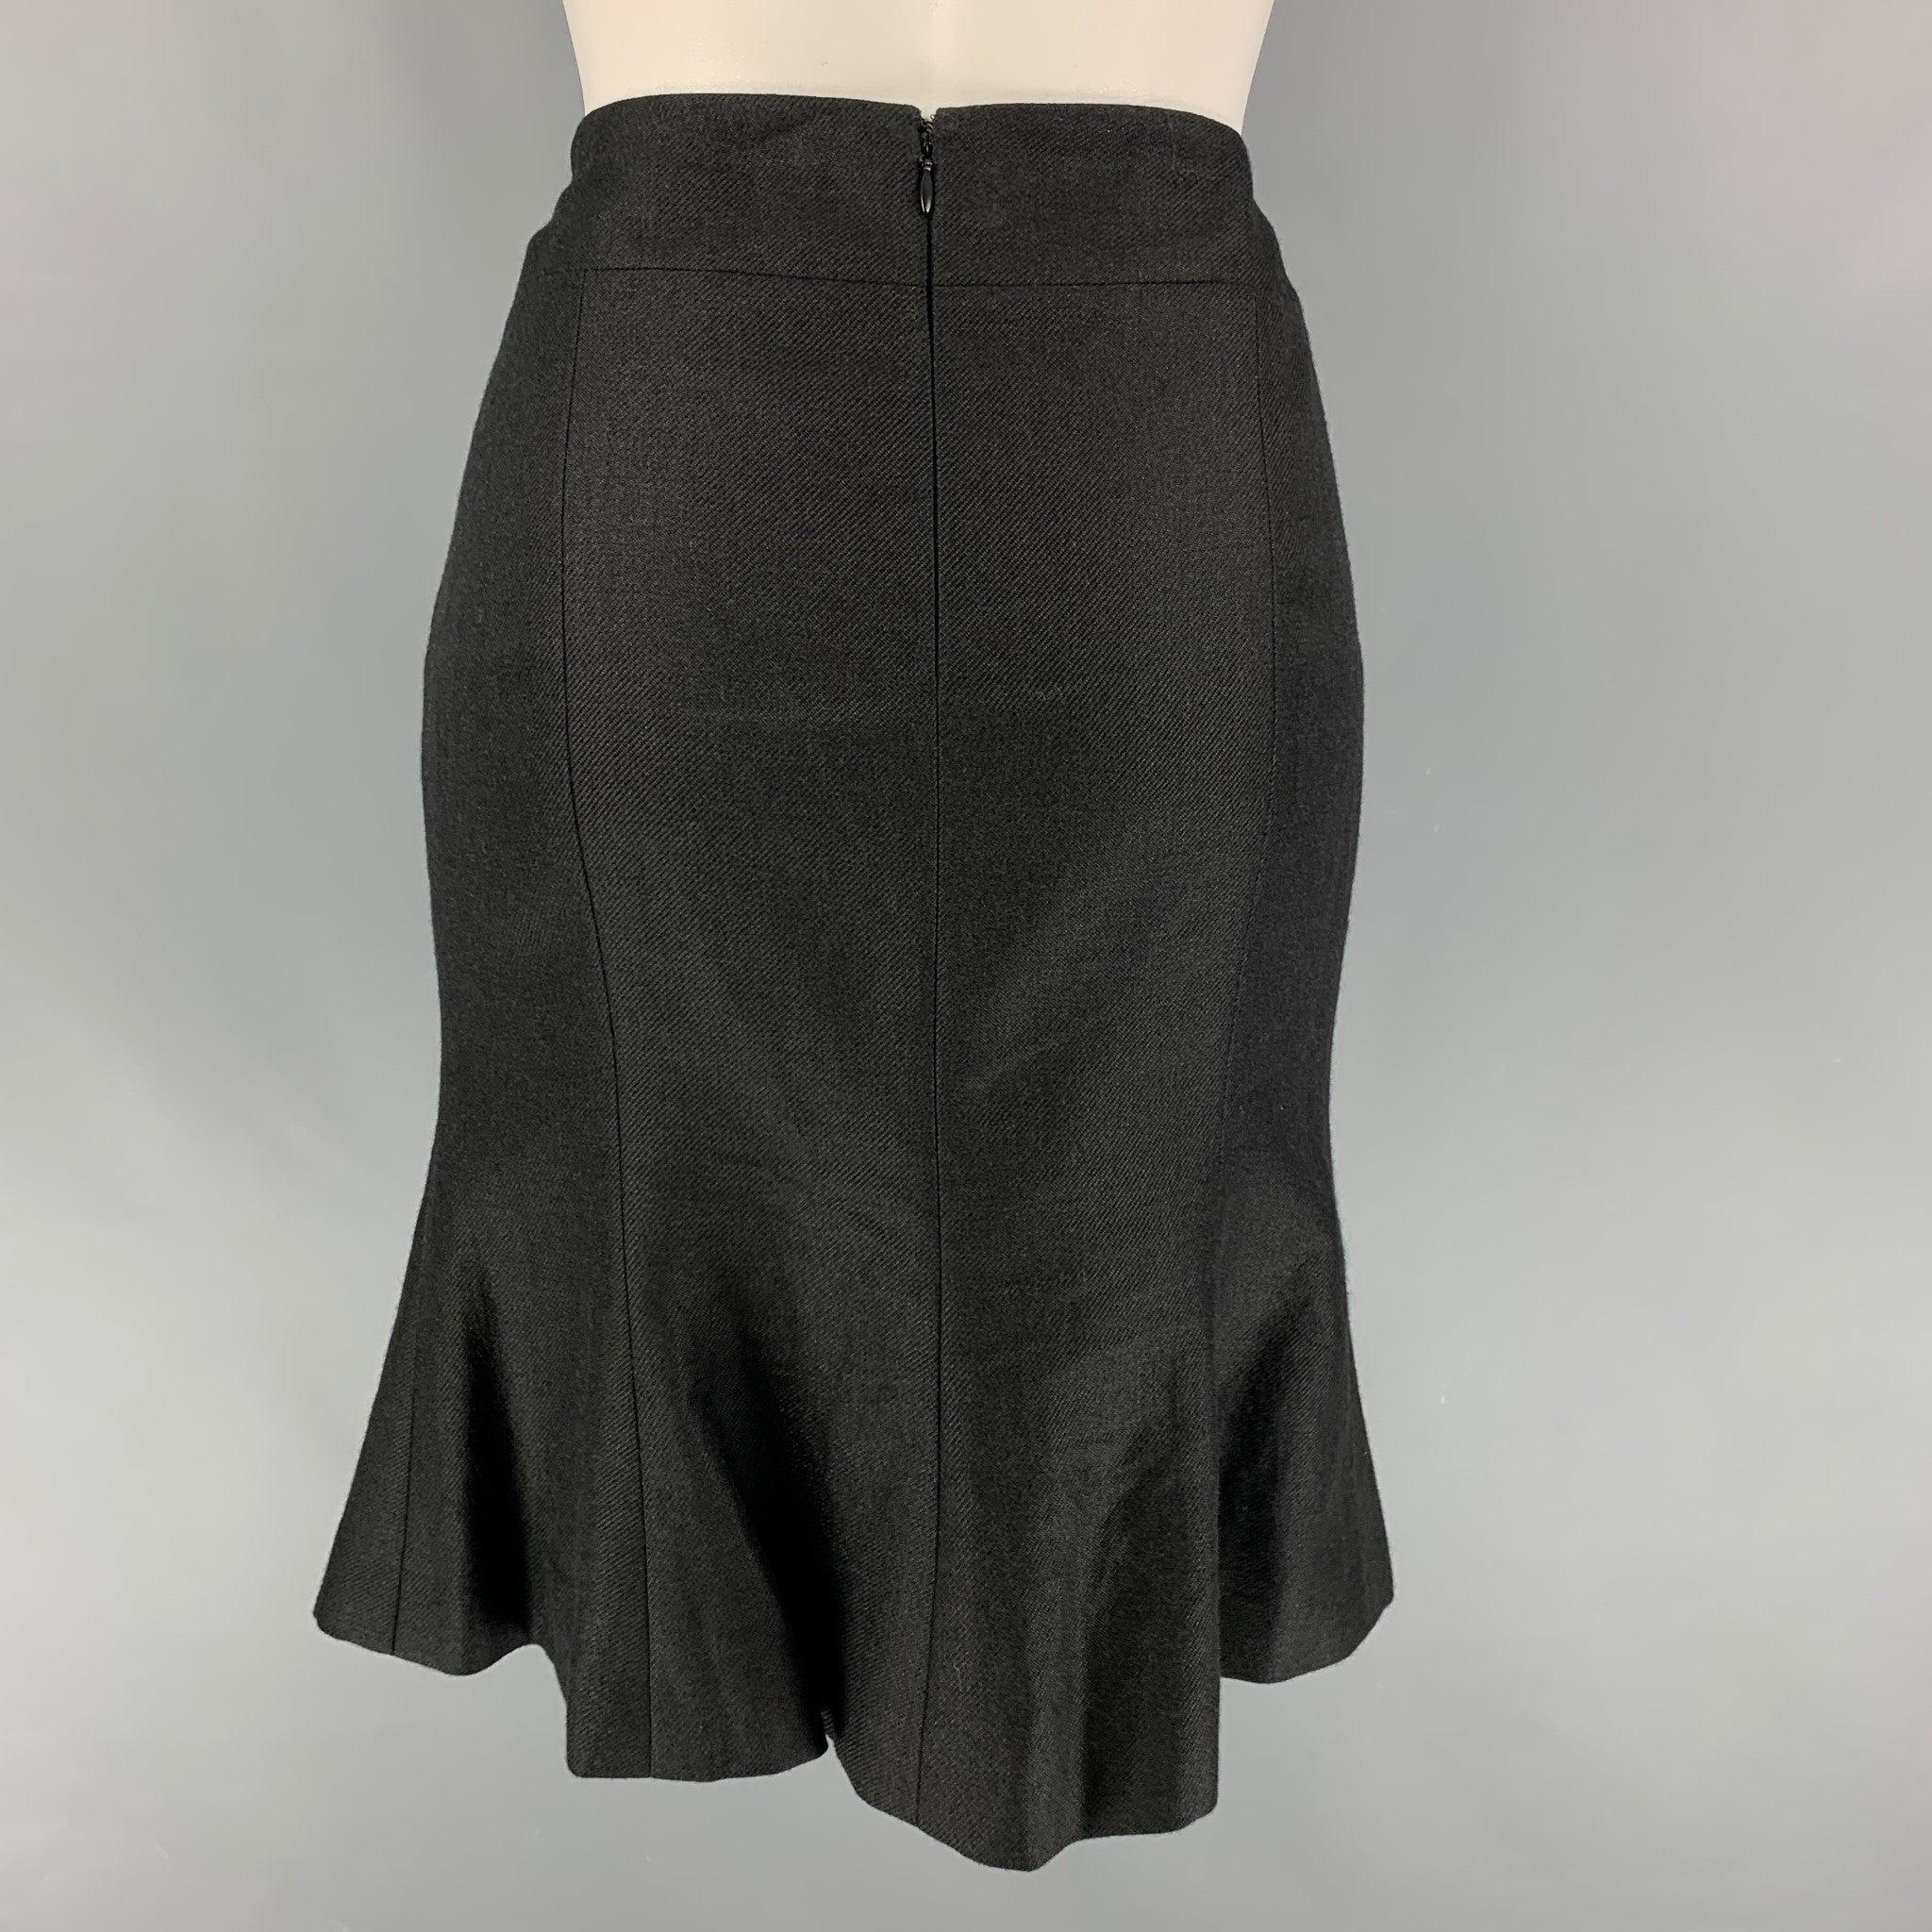 CHANEL AL719 05C Size 4 Black Linen Trumpet Skirt In Good Condition For Sale In San Francisco, CA